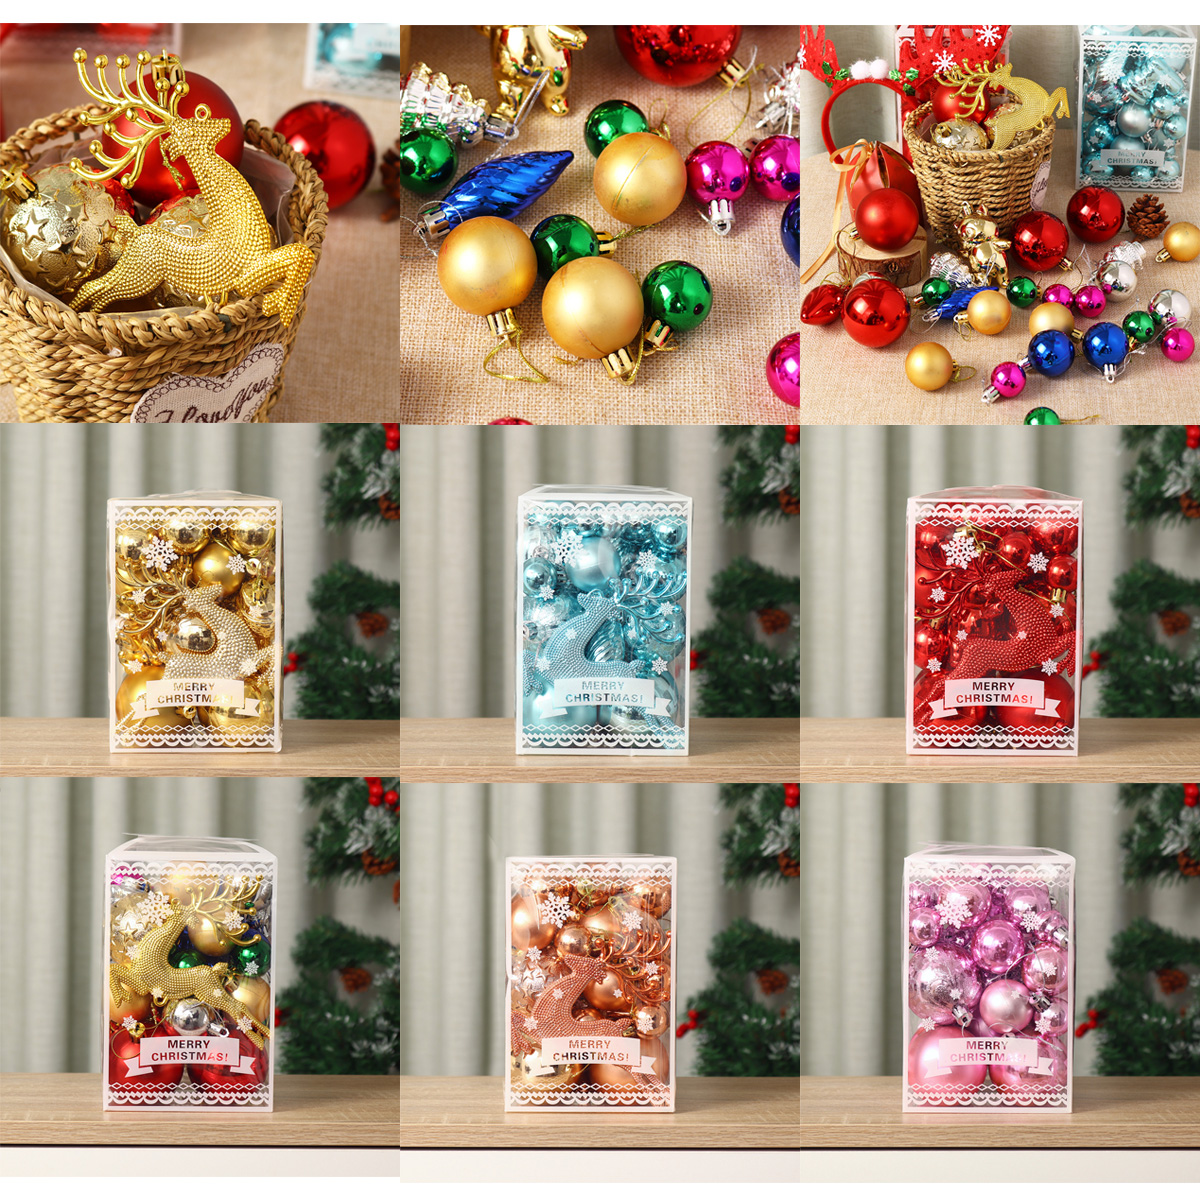 30-PcsSet-Glitter-Christmas-Tree-Ball-Baubles-Colorful-for-Xmas-Party-Home-Garden-Christmas-Decorati-1770980-1